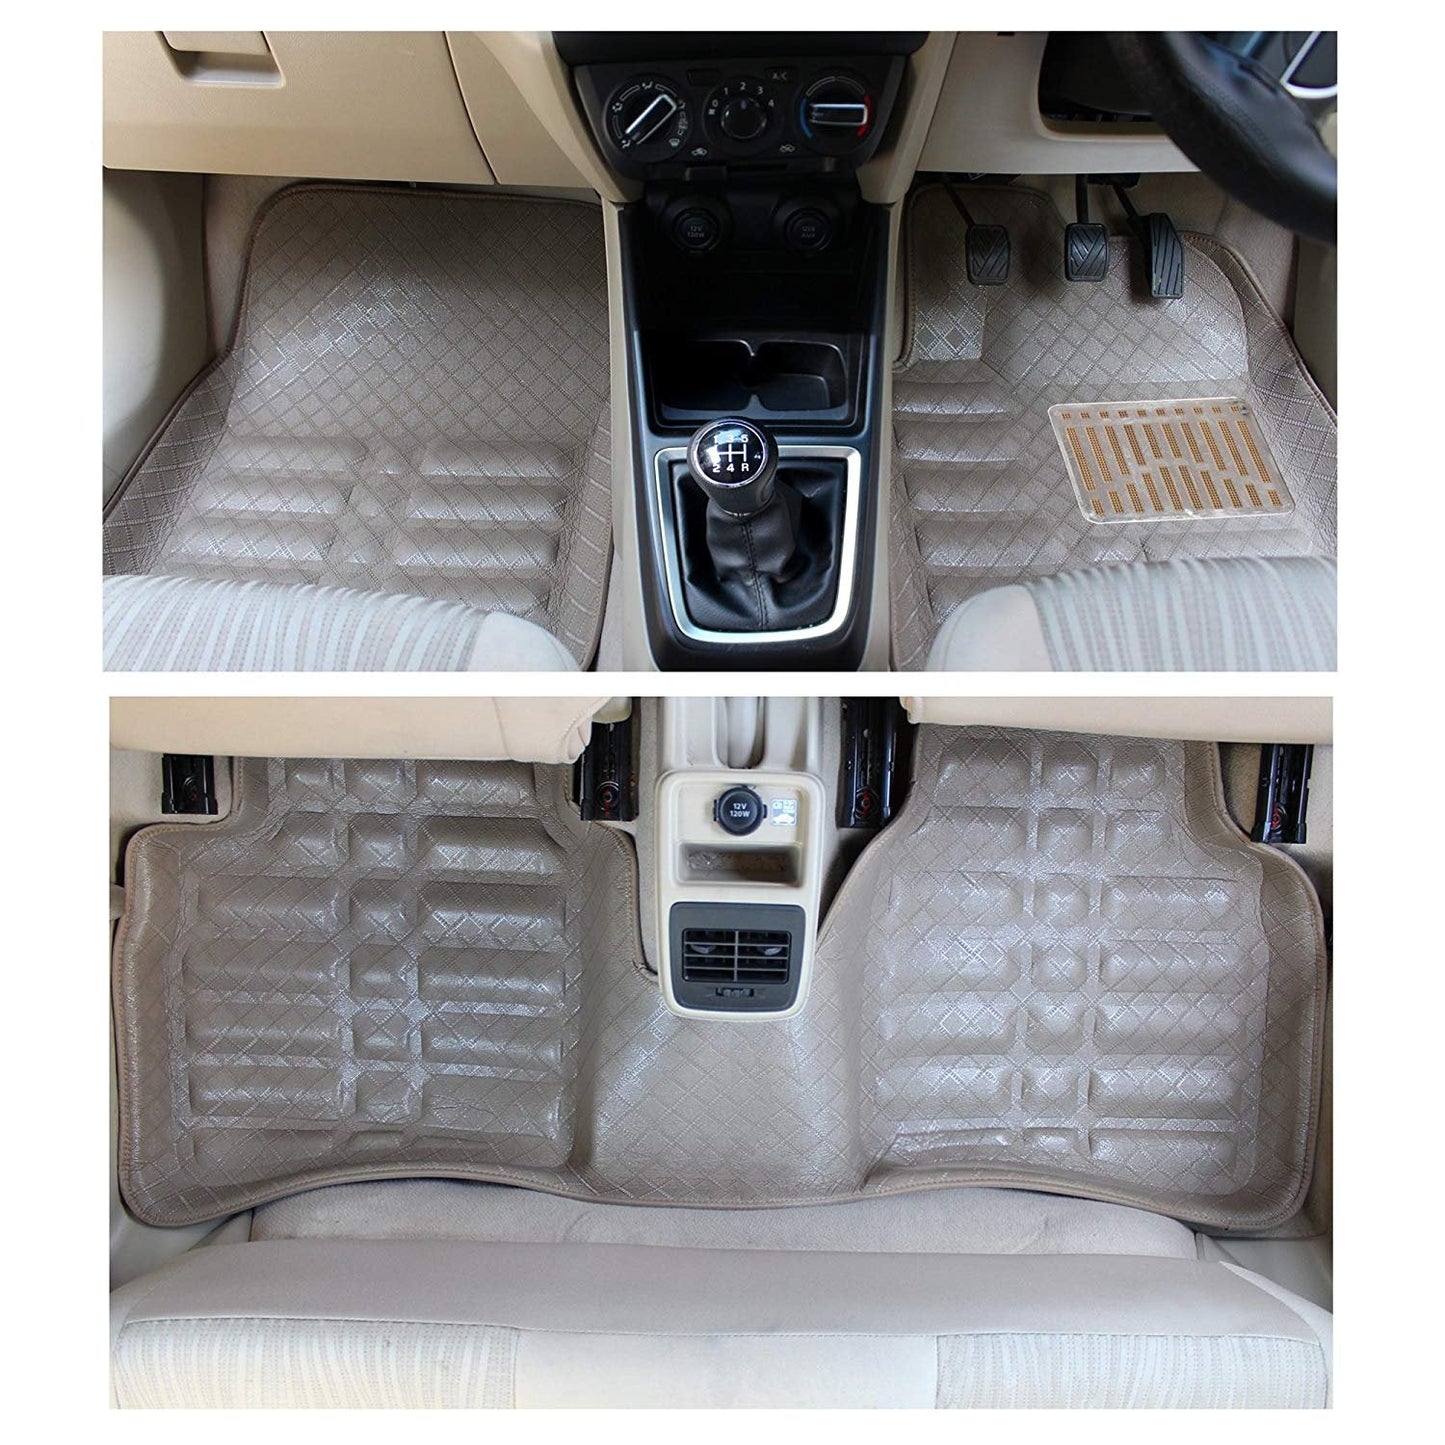 Oshotto 4D Artificial Leather Car Floor Mats For Toyota Urban Cruiser - Set of 3 (2 pcs Front & one Long Single Rear pc) - Beige